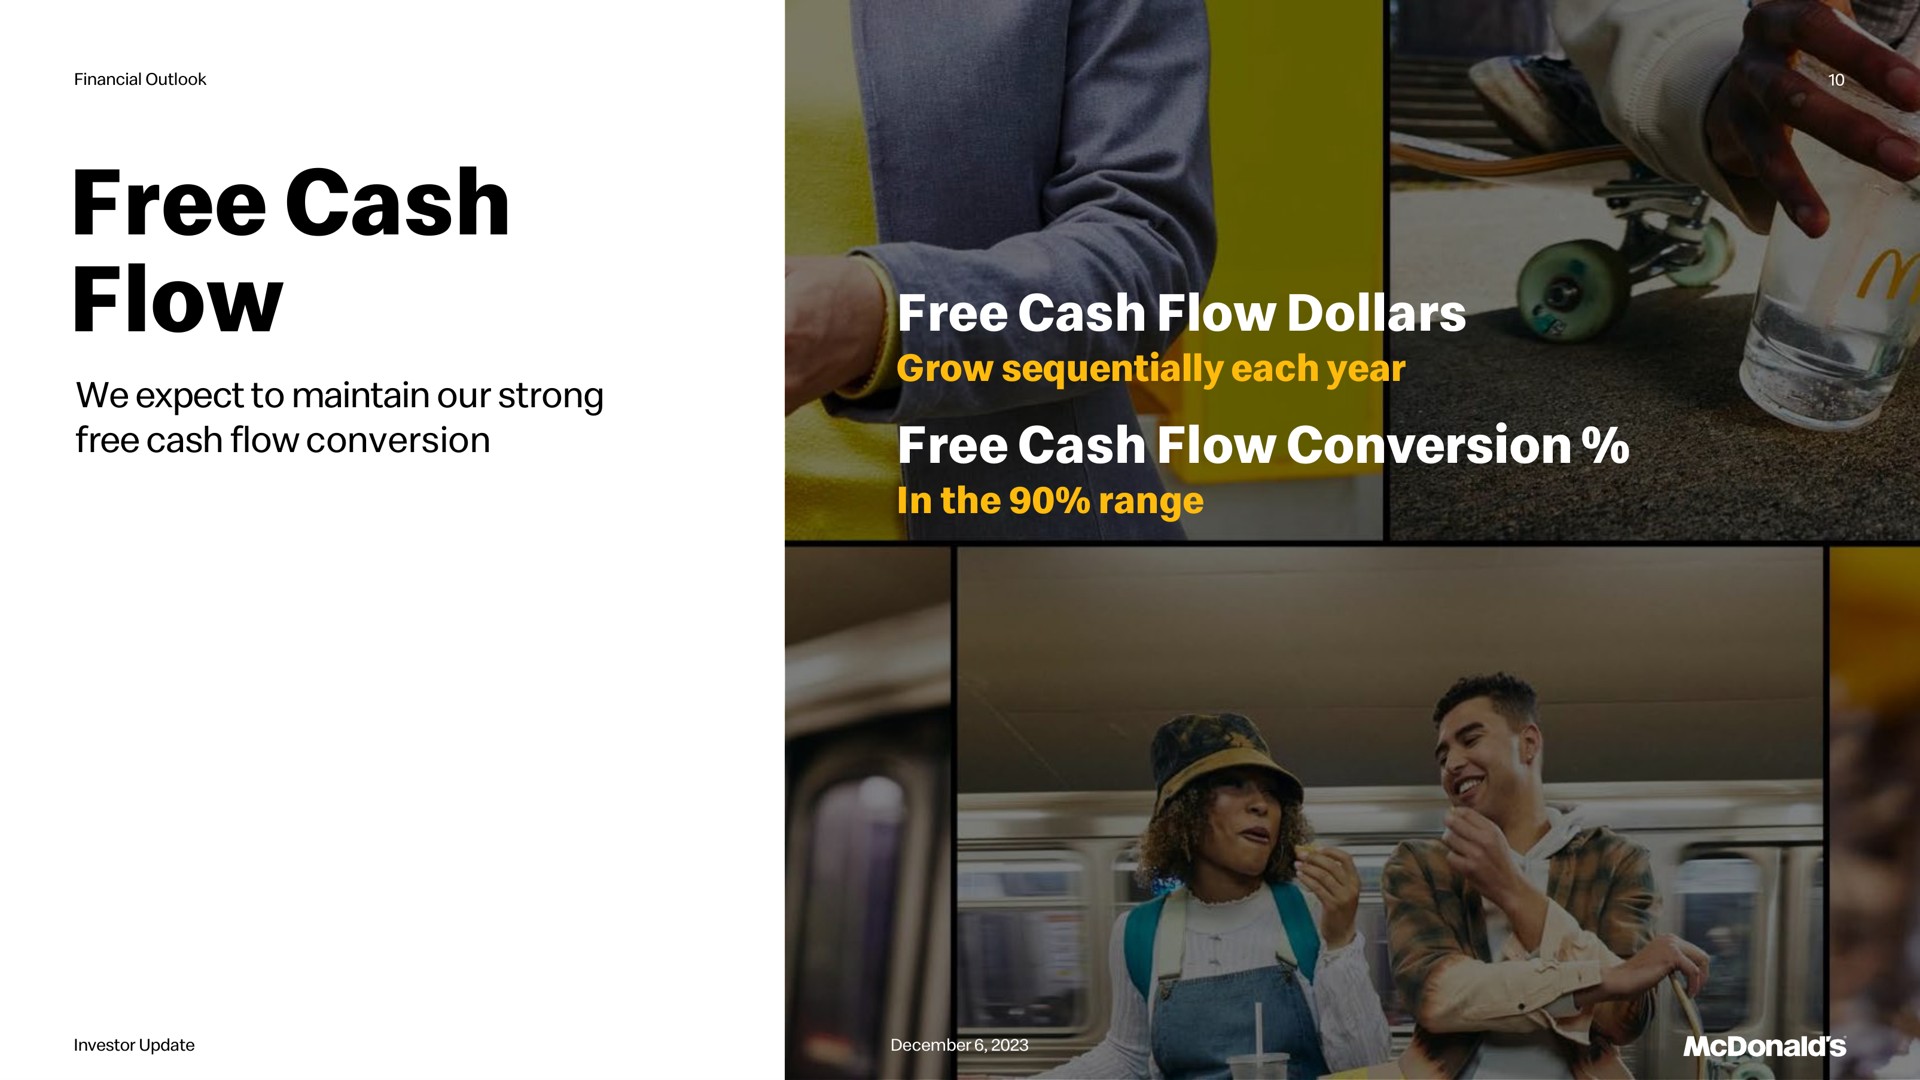 free cash flow we expect to maintain our strong free cash flow conversion free cash flow dollars grow sequentially each year free cash flow conversion in the range act | McDonald's